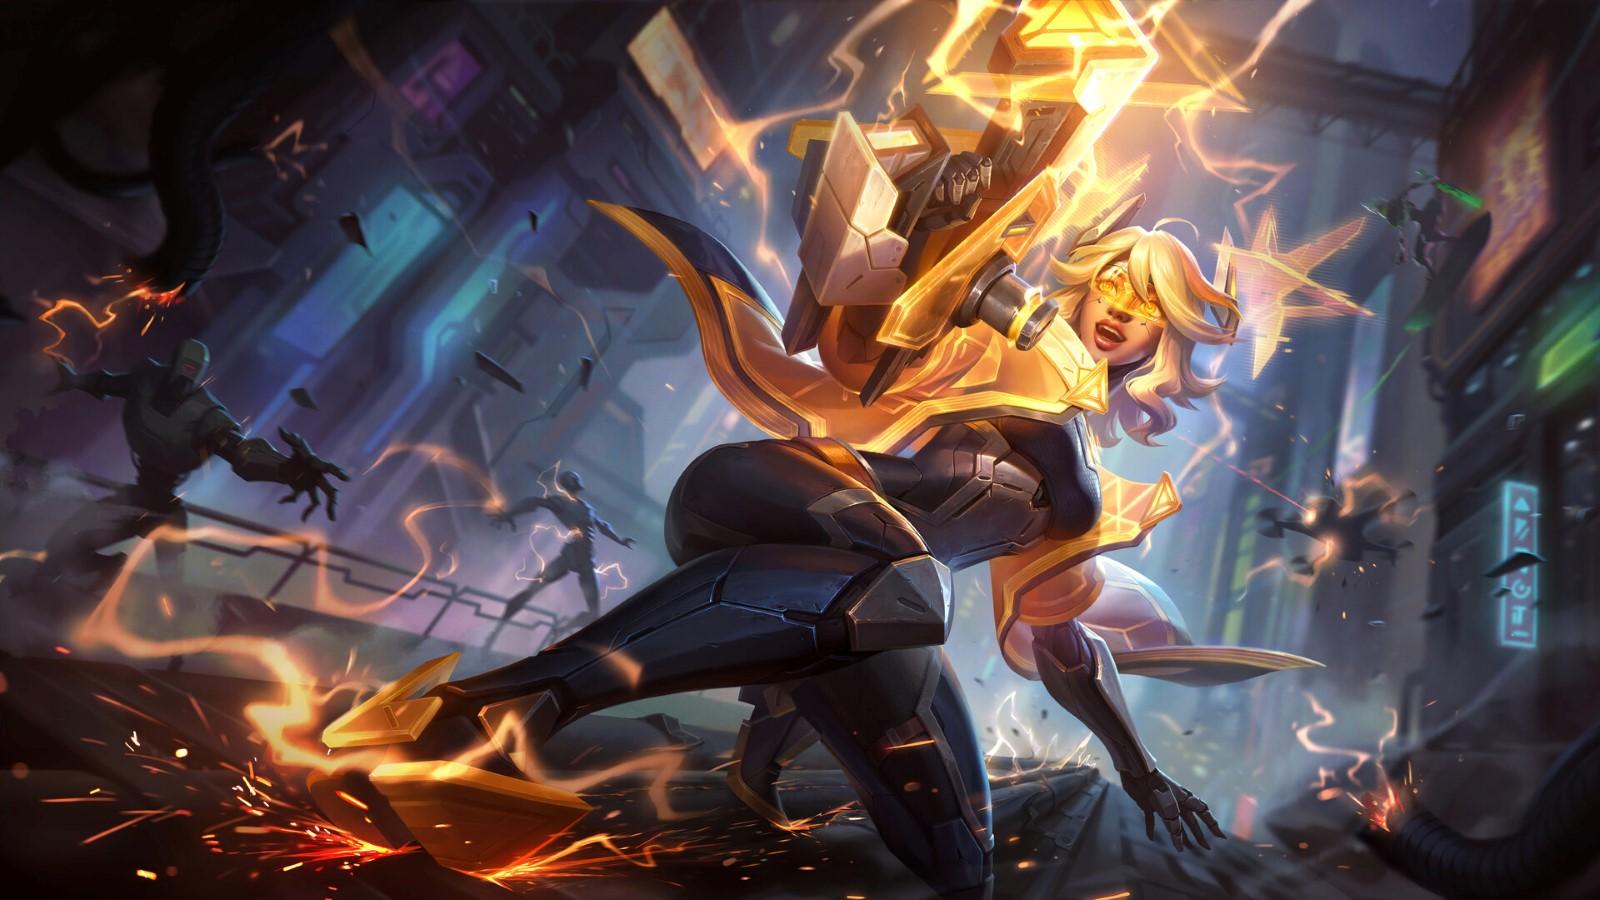 League of Legends patch 13.12 - Release date, buffs, nerfs and changes